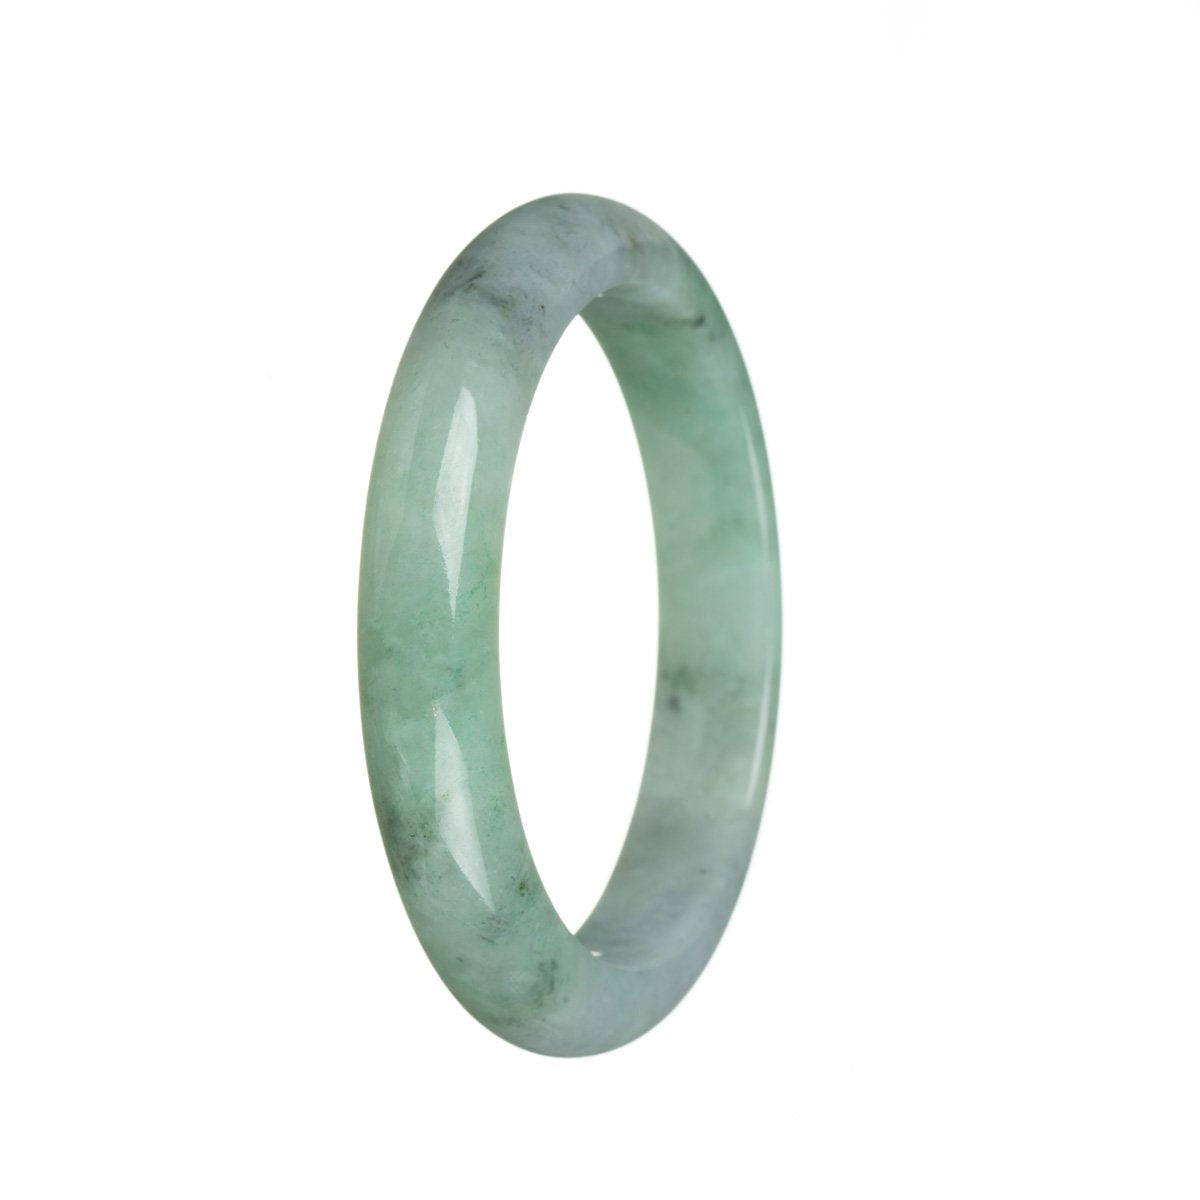 A close-up photo of a beautiful, green jade bangle with a smooth, semi-round shape. This high-quality piece is certified Grade A and is made from traditional jade. The bangle has a 60mm diameter and is sold by MAYS GEMS.